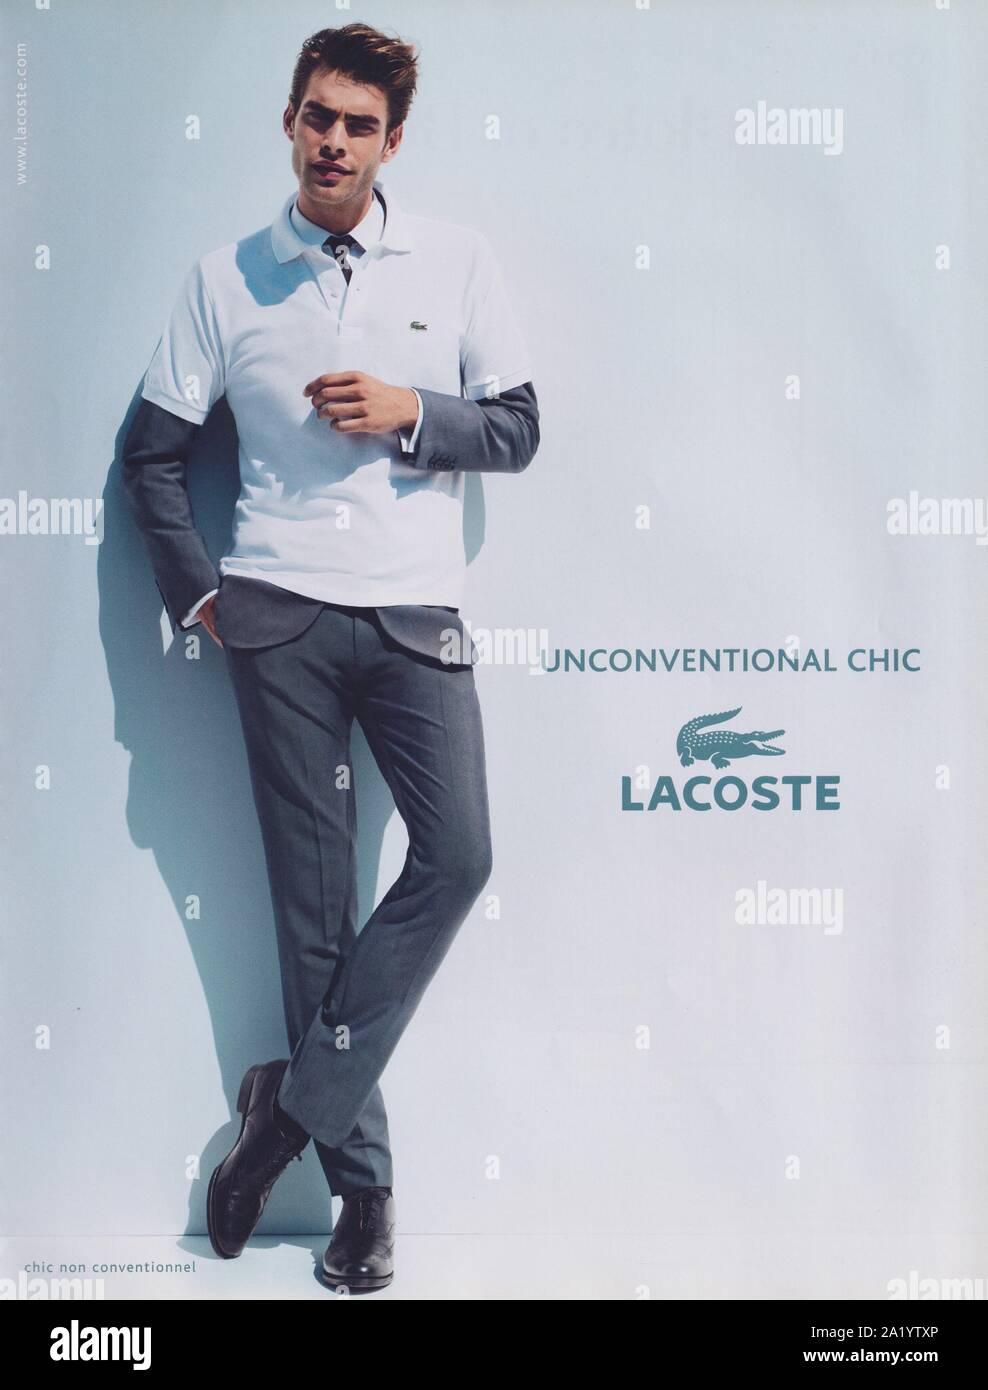 poster advertising Lacoste fashion house in paper magazine from 2011 year, advertisement, creative Lacoste advert from 2010s Stock Photo